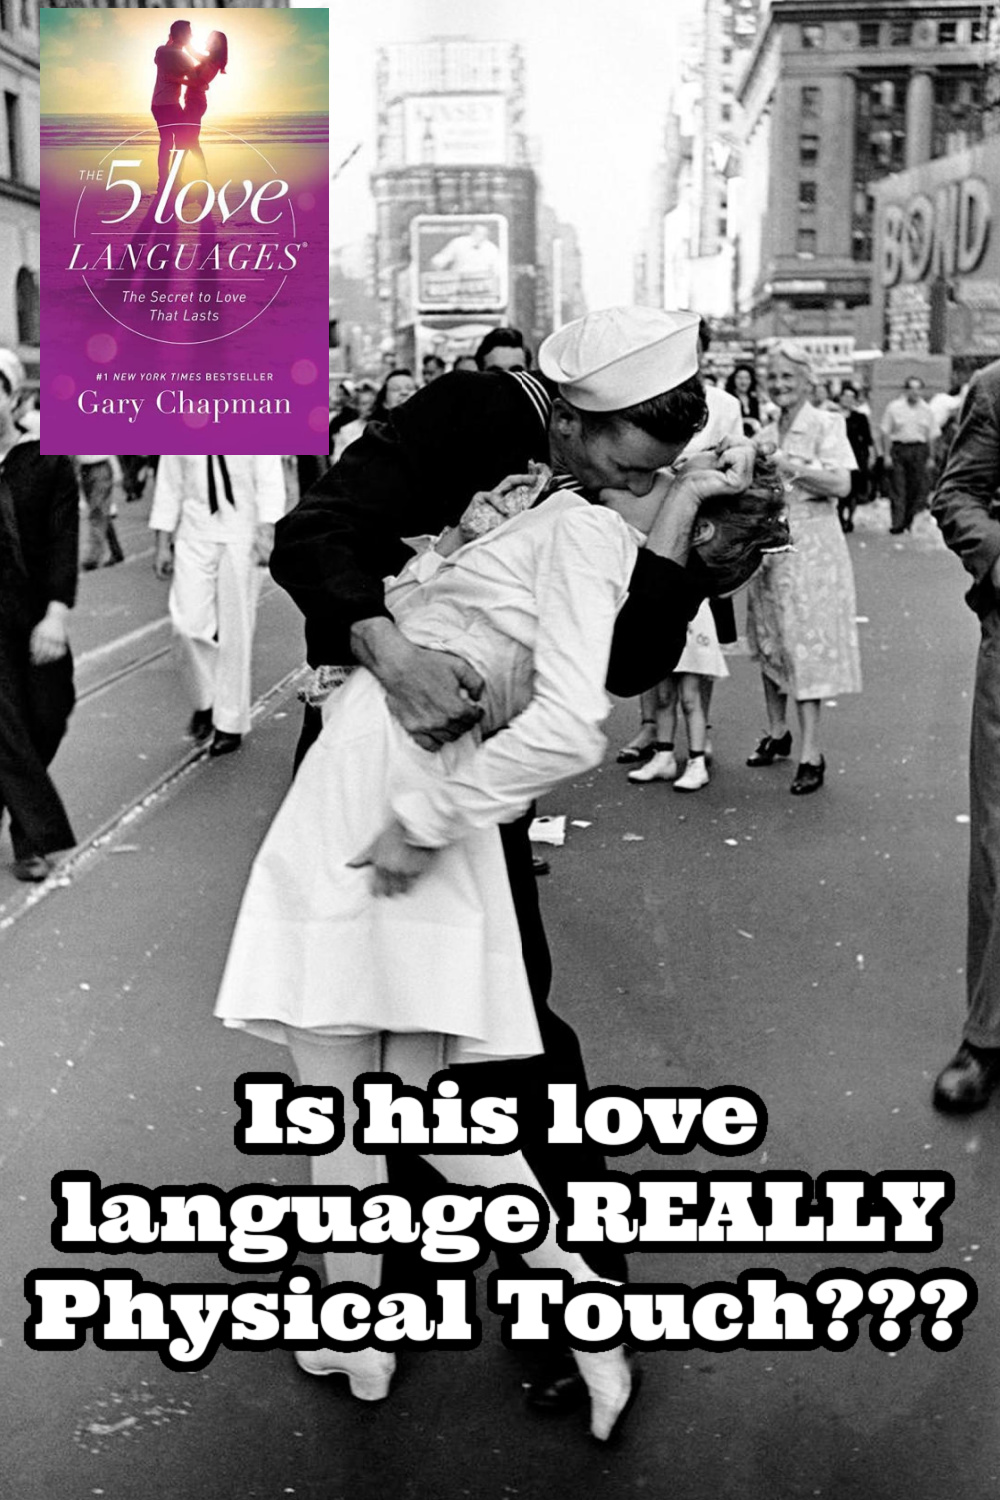 love language misunderstanding, understanding your partners love language, his love language is physical touch, myths about the love languages, myth of physical touch, how to improve, physical intimacy in a relationship, erotic blueprints, love language communication, understanding your love language can be beneficial because, physical intimacy vs emotional intimacy, emotional intimacy in relationships, masculine and feminine energy, masculine and feminine energy in relationships, understanding masculine and feminine energy, sexual polarity in relationships, sexual polarity, Everyday starlet, sarah blodgett,